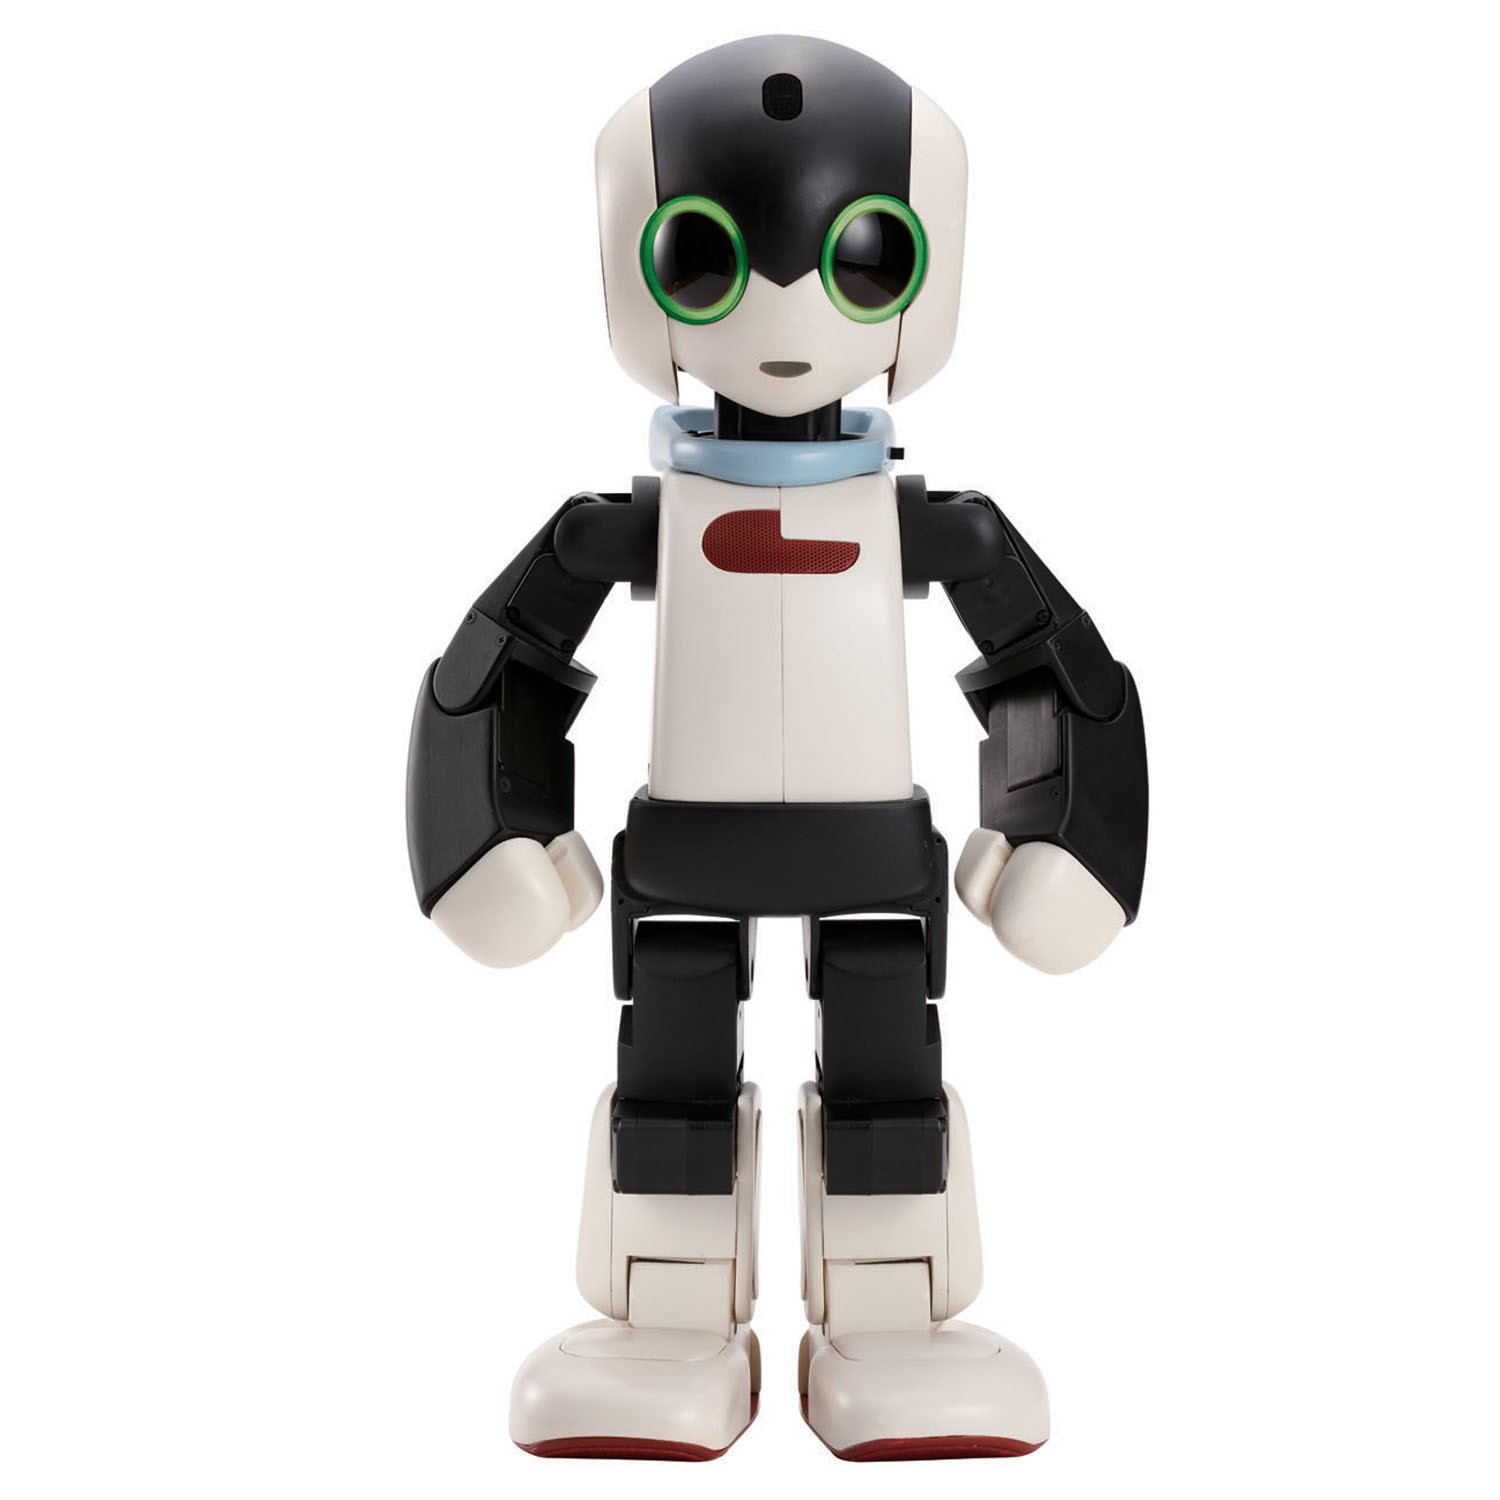 A toy robot with a menacing expression